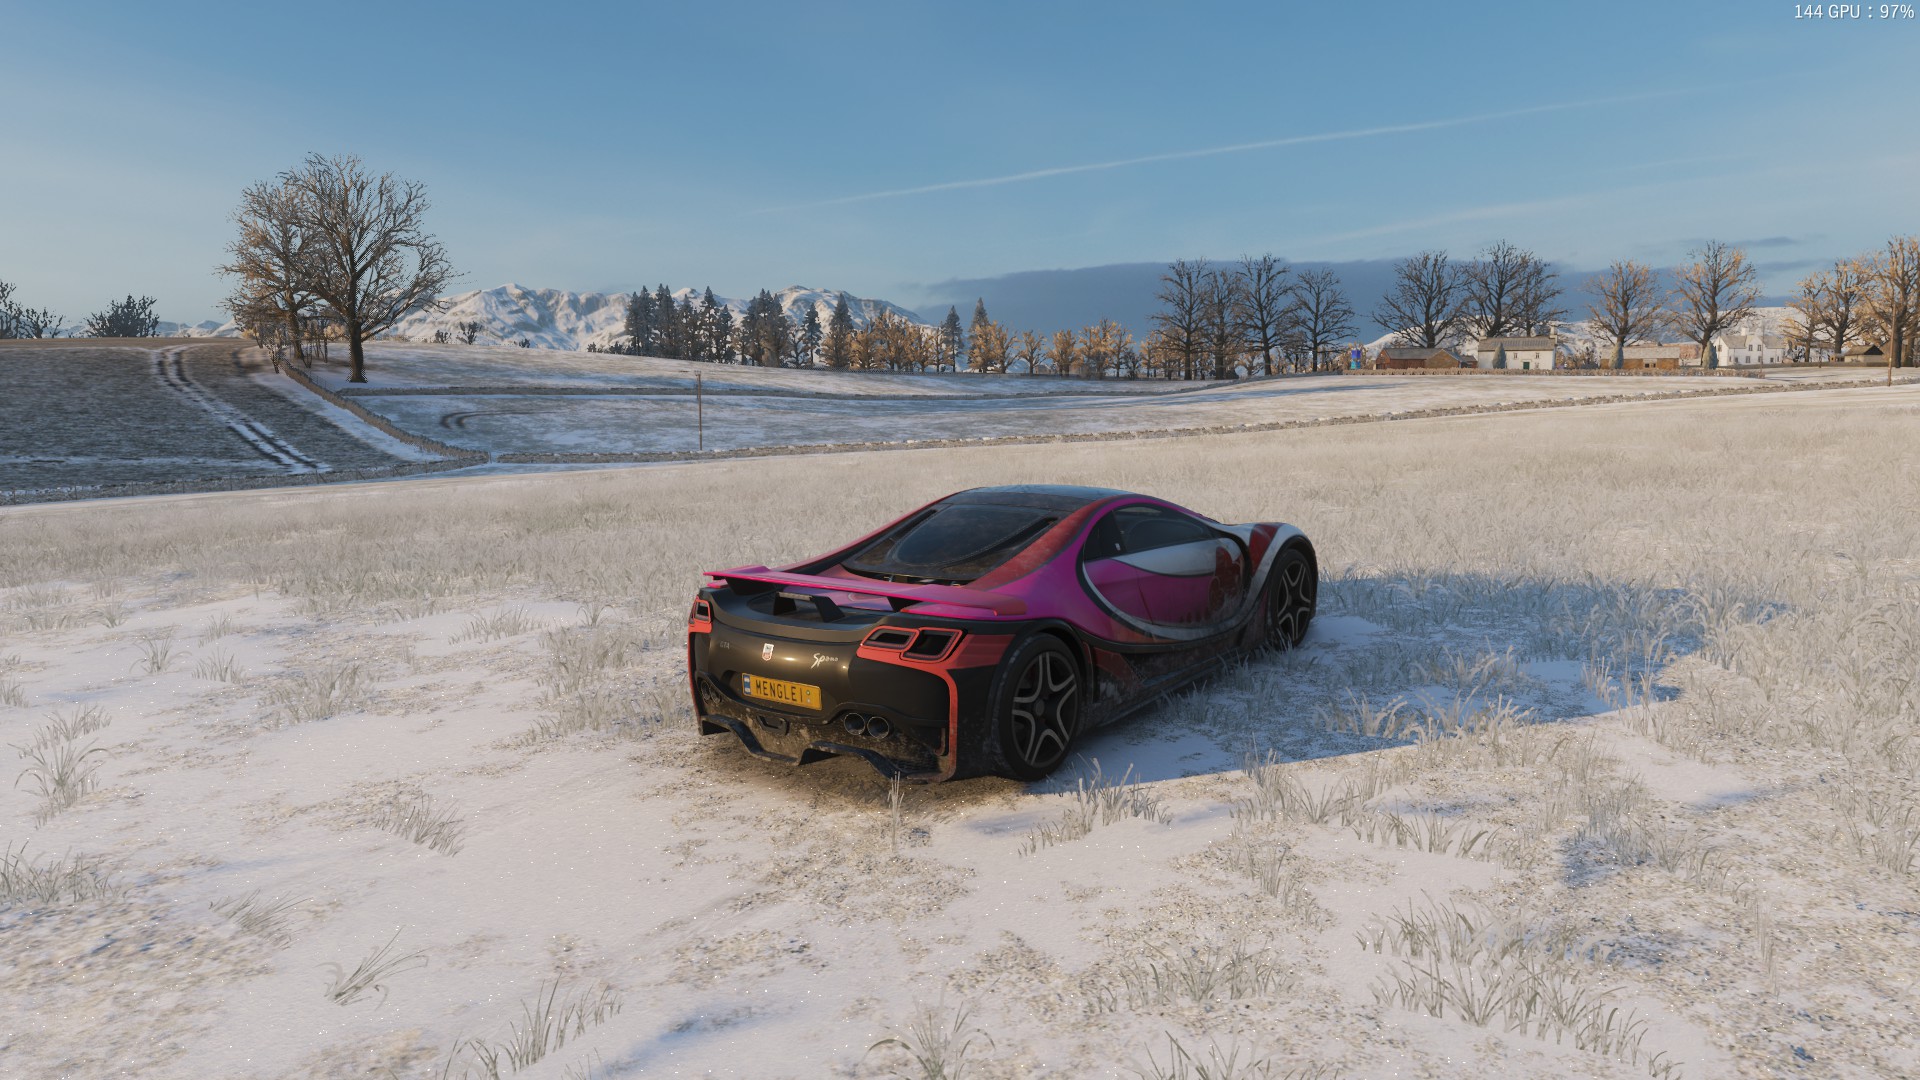 General 1920x1080 Forza Horizon 4 landscape video game art snow sky trees car rear view licence plates video games CGI vehicle